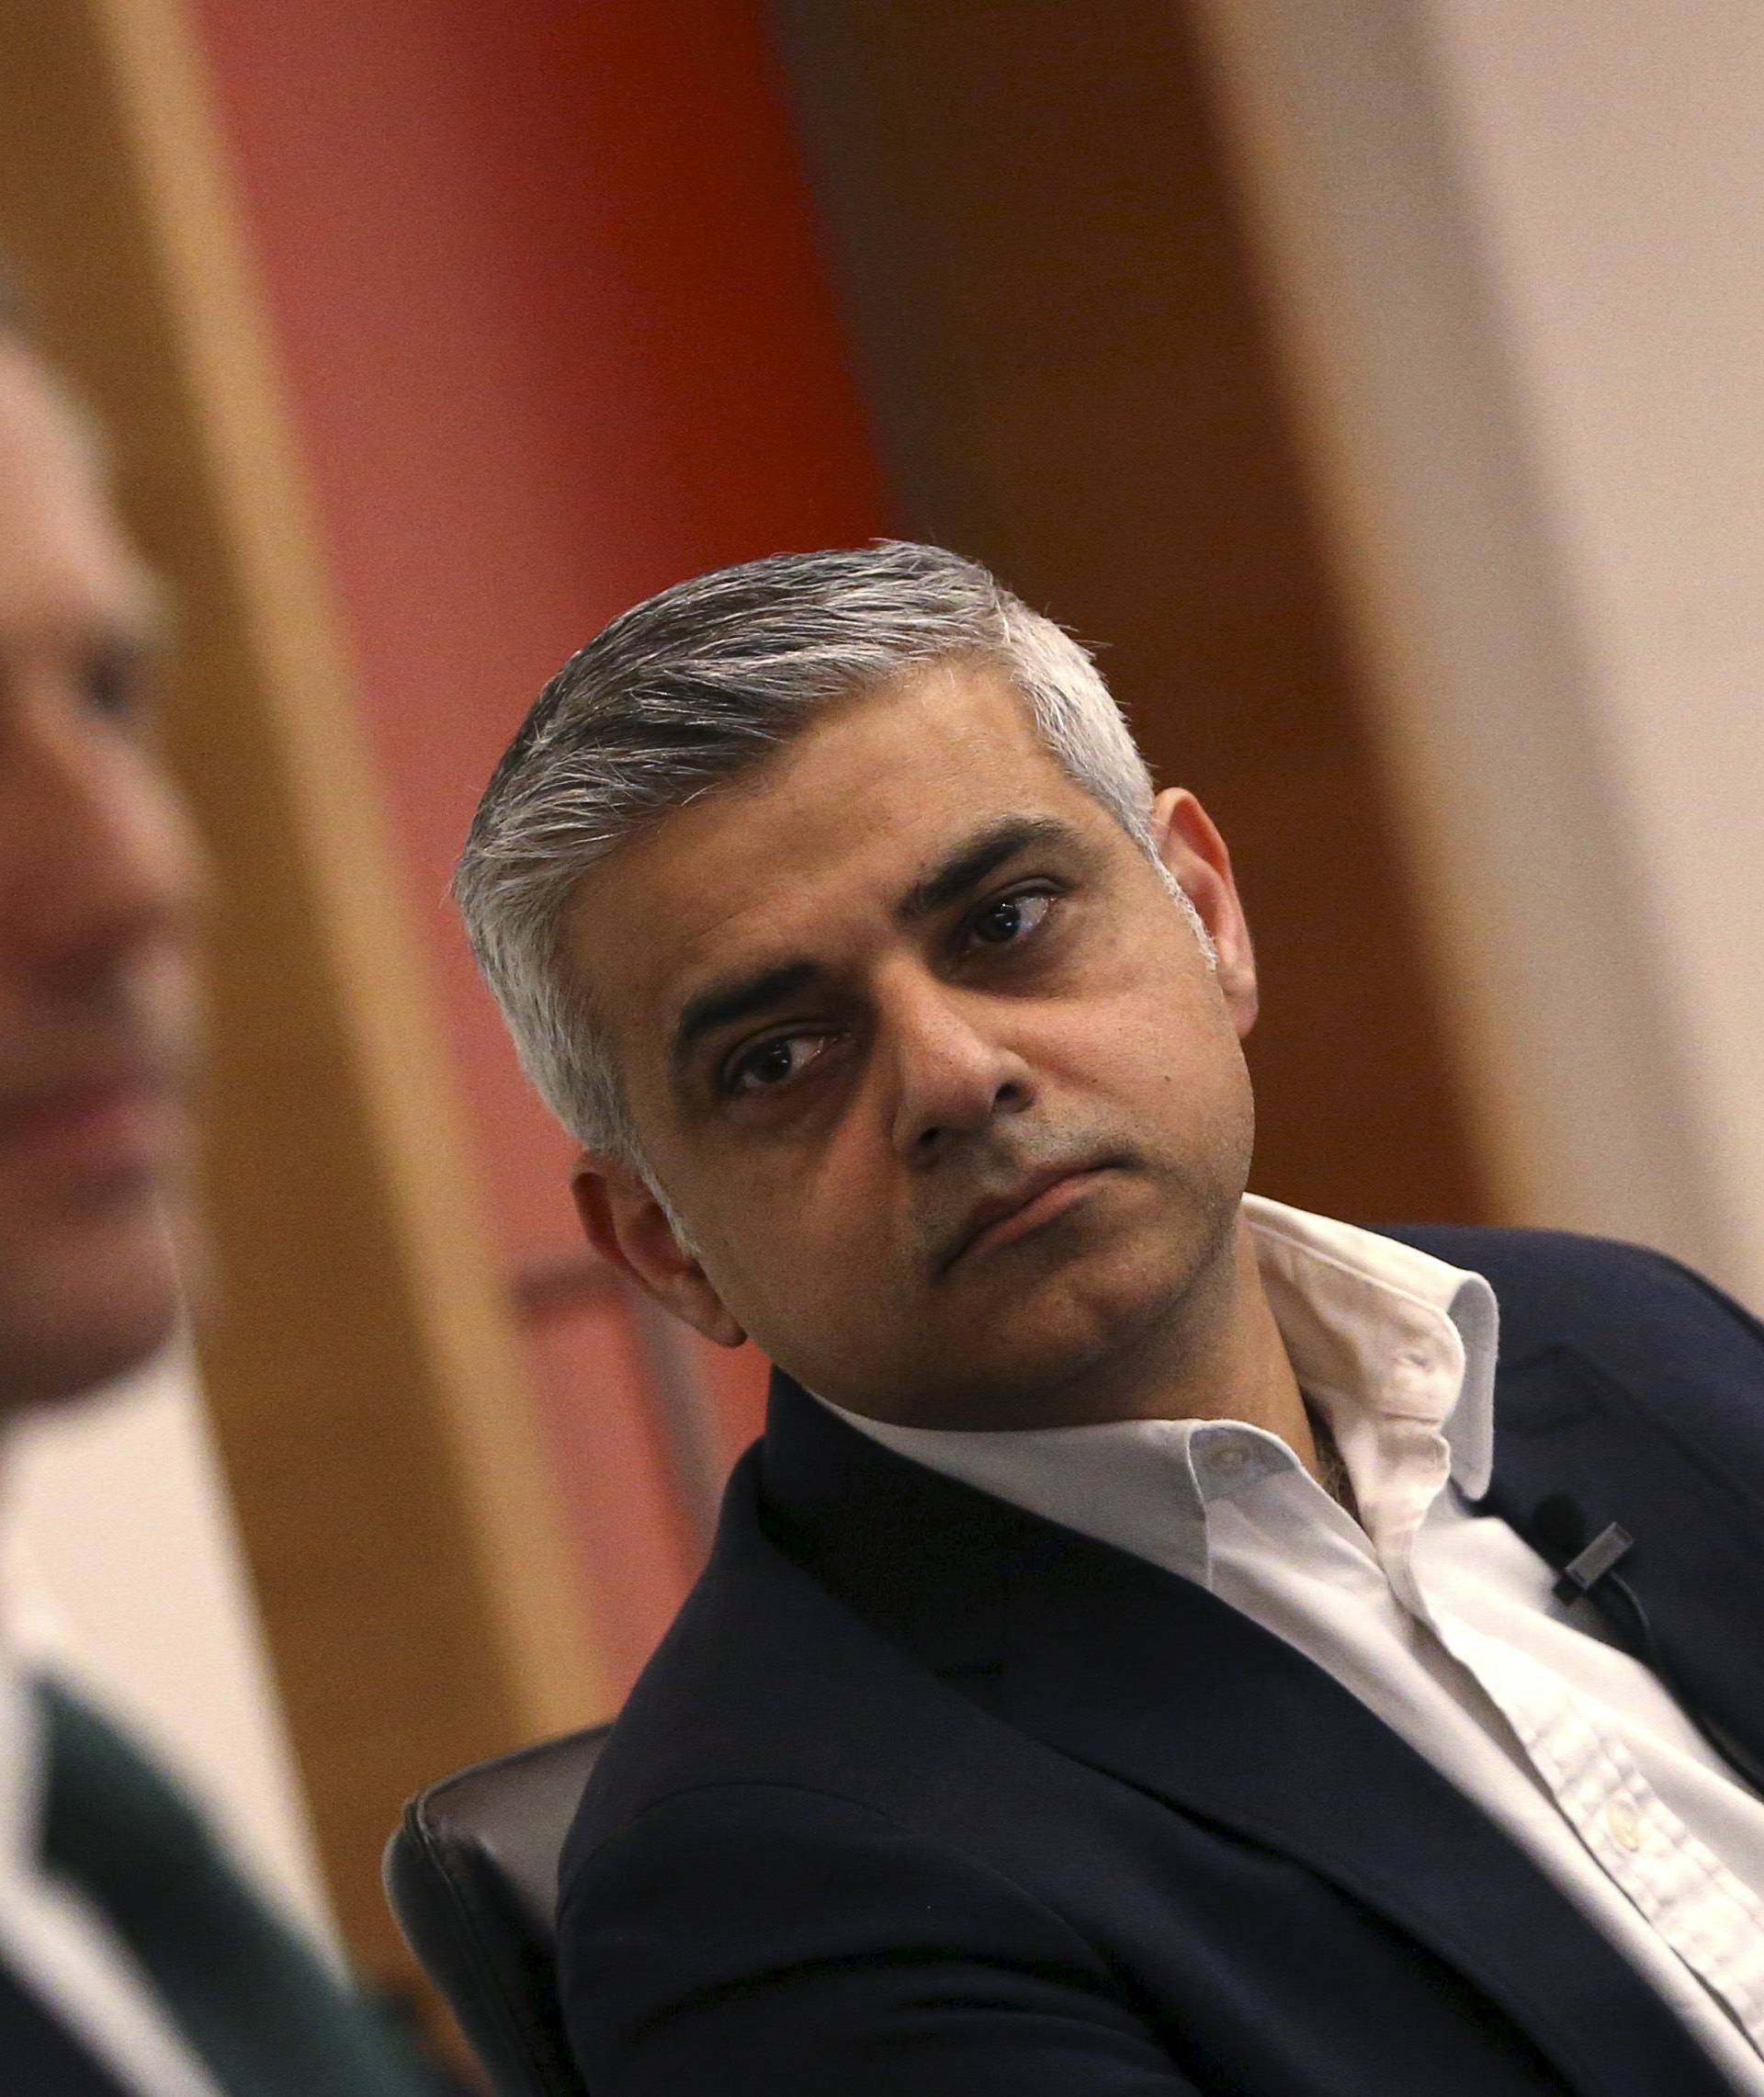 Britain's Labour Party candidate for Mayor of London Sadiq Khan looks at Conservative party candidate Zak Goldsmith during a hustings event in London